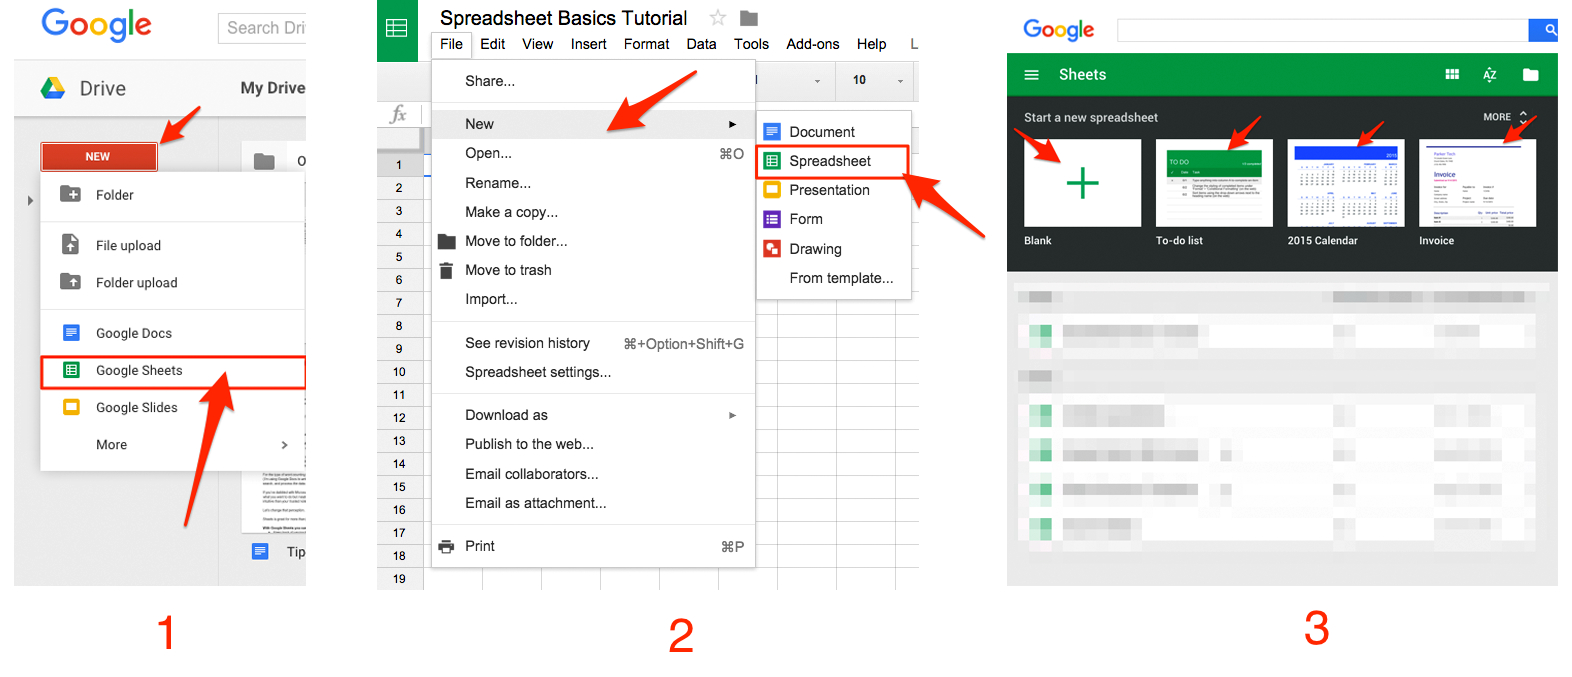 How To Make A Spreadsheet Online Intended For Google Sheets 101: The Beginner's Guide To Online Spreadsheets  The